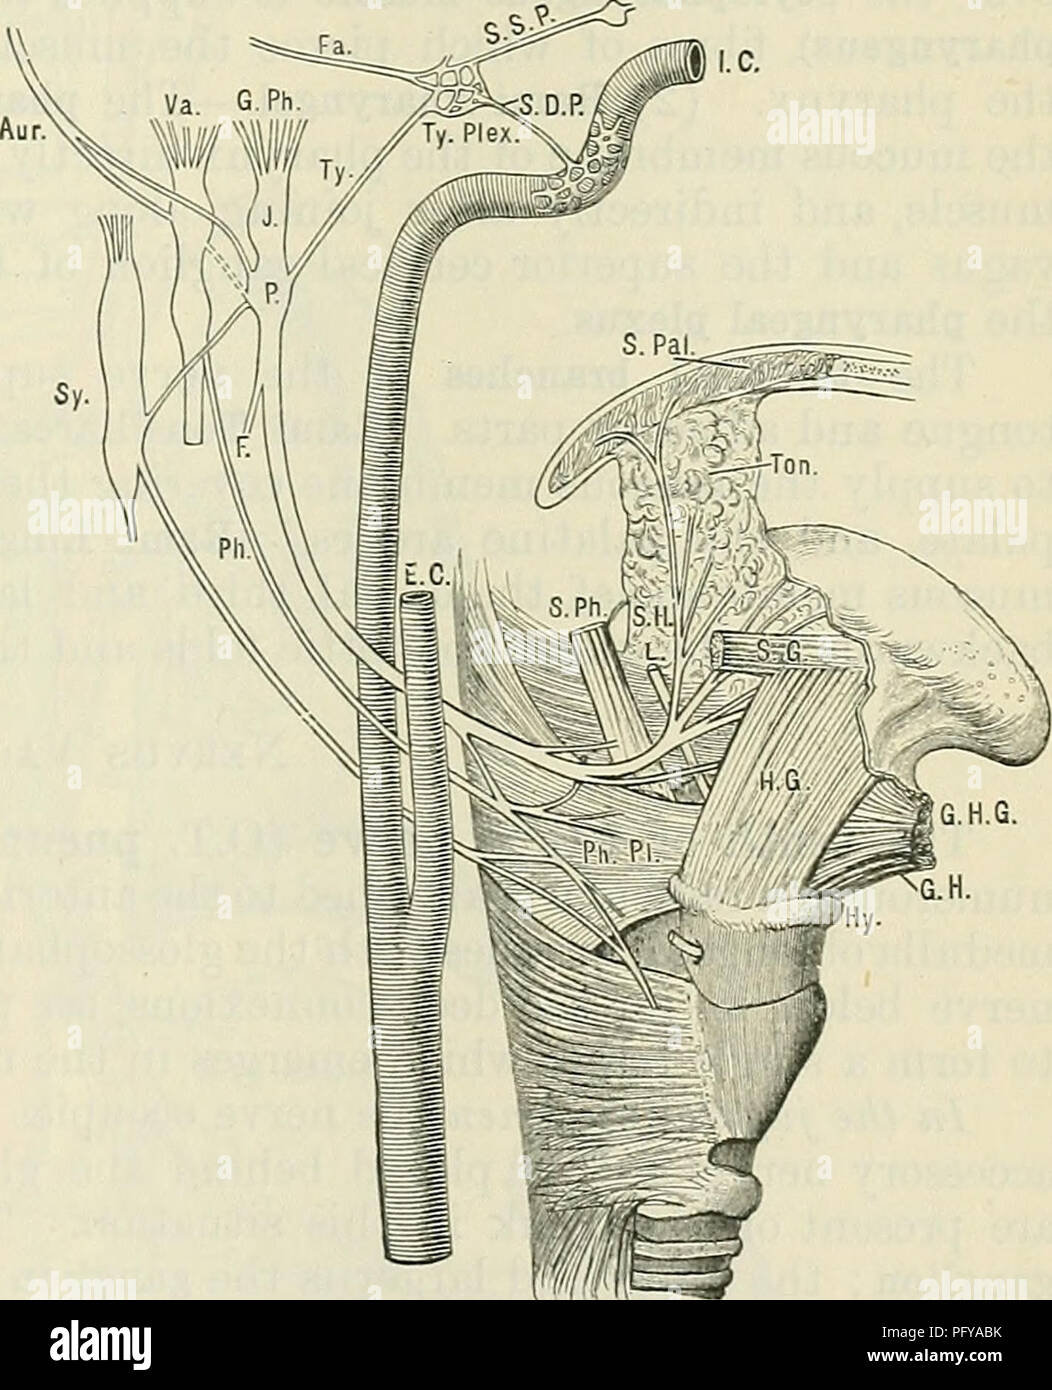 . Cunningham's Text-book of anatomy. Anatomy. GLOSSOPHAEYNGEAL NEEVE. 785 branch bo the genicular ganglion of the facial nerve. It then separates into three terminal branches which pierce the lamina cribrosa. (1) N. Utricularis.—The utricular nerve supplies the macula acustica of the utricle. (2) and (3) N. Ampullaris Superior et Lateralis.—The superior and lateral ampullary nerves supply the ampullar of the superior and lateral semicircular ducts. N. Cochleae.—The inferior or cochlear nerve gives off (1) n. saccularis, a saccular nerve to the macula acustica of the saccule, (2) n. ampullaris  Stock Photo